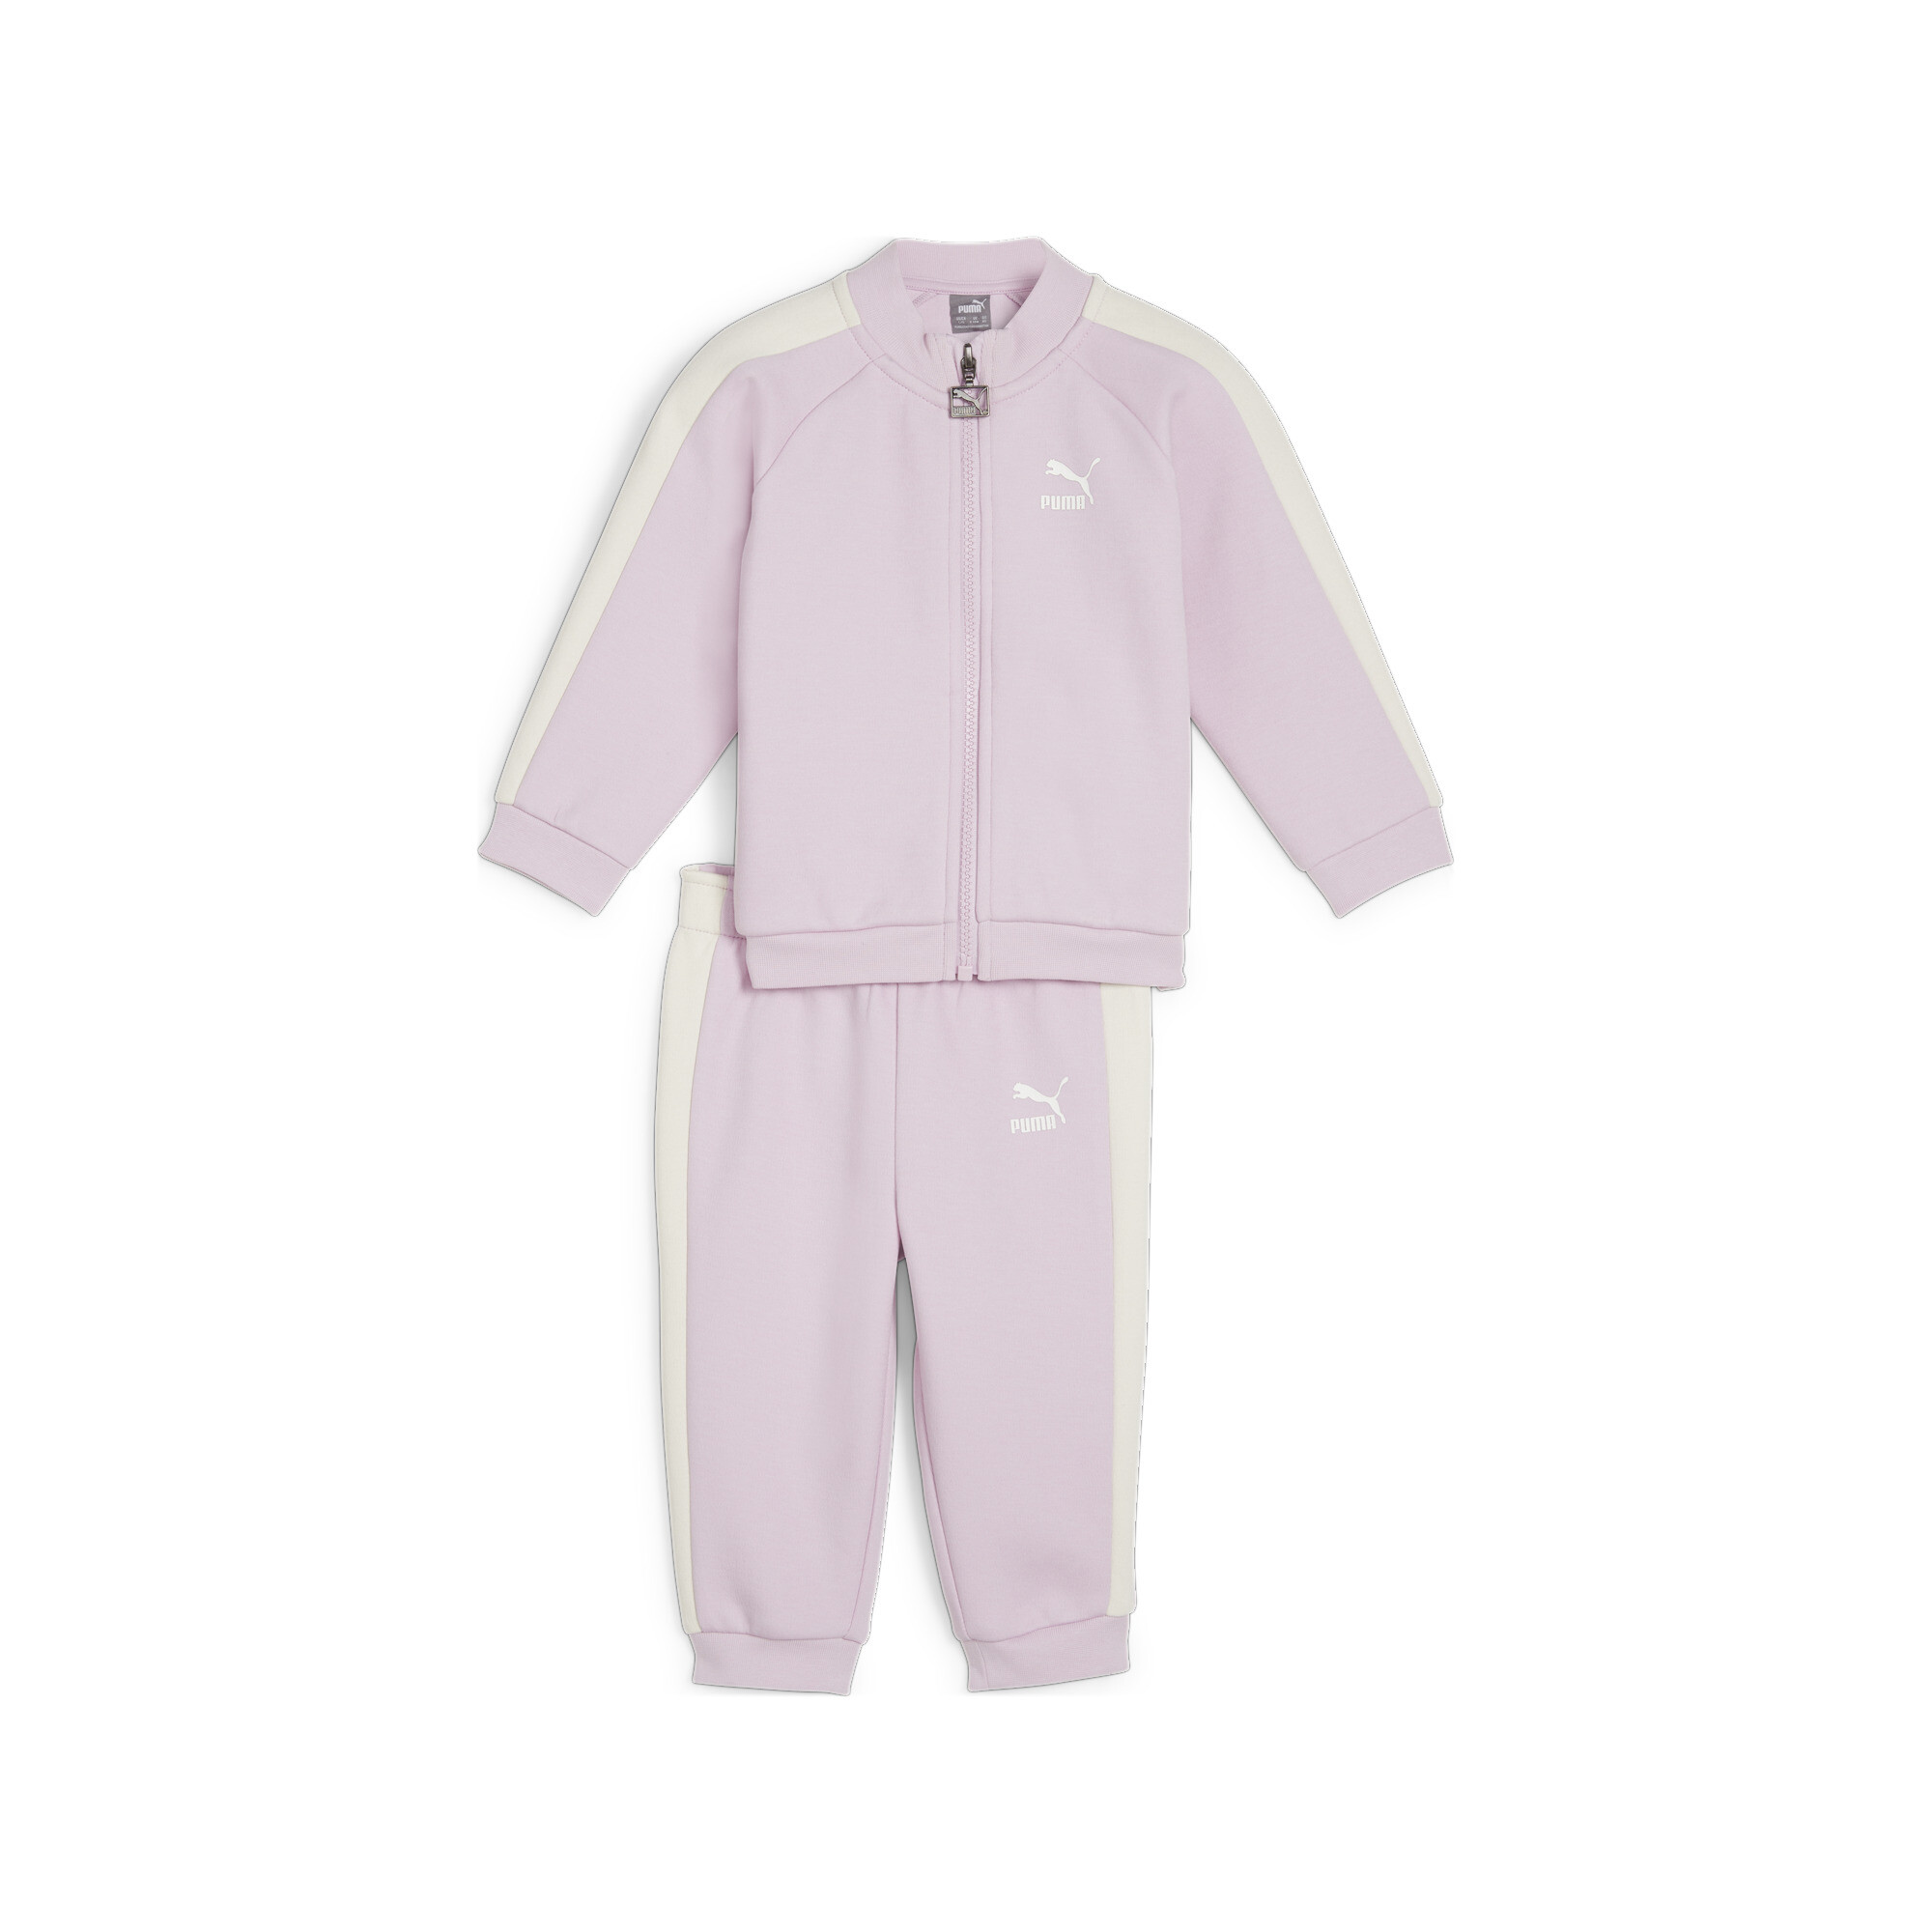 Kids' PUMA MINICATS T7 ICONIC Baby Tracksuit Set In Purple, Size 6-9 Months